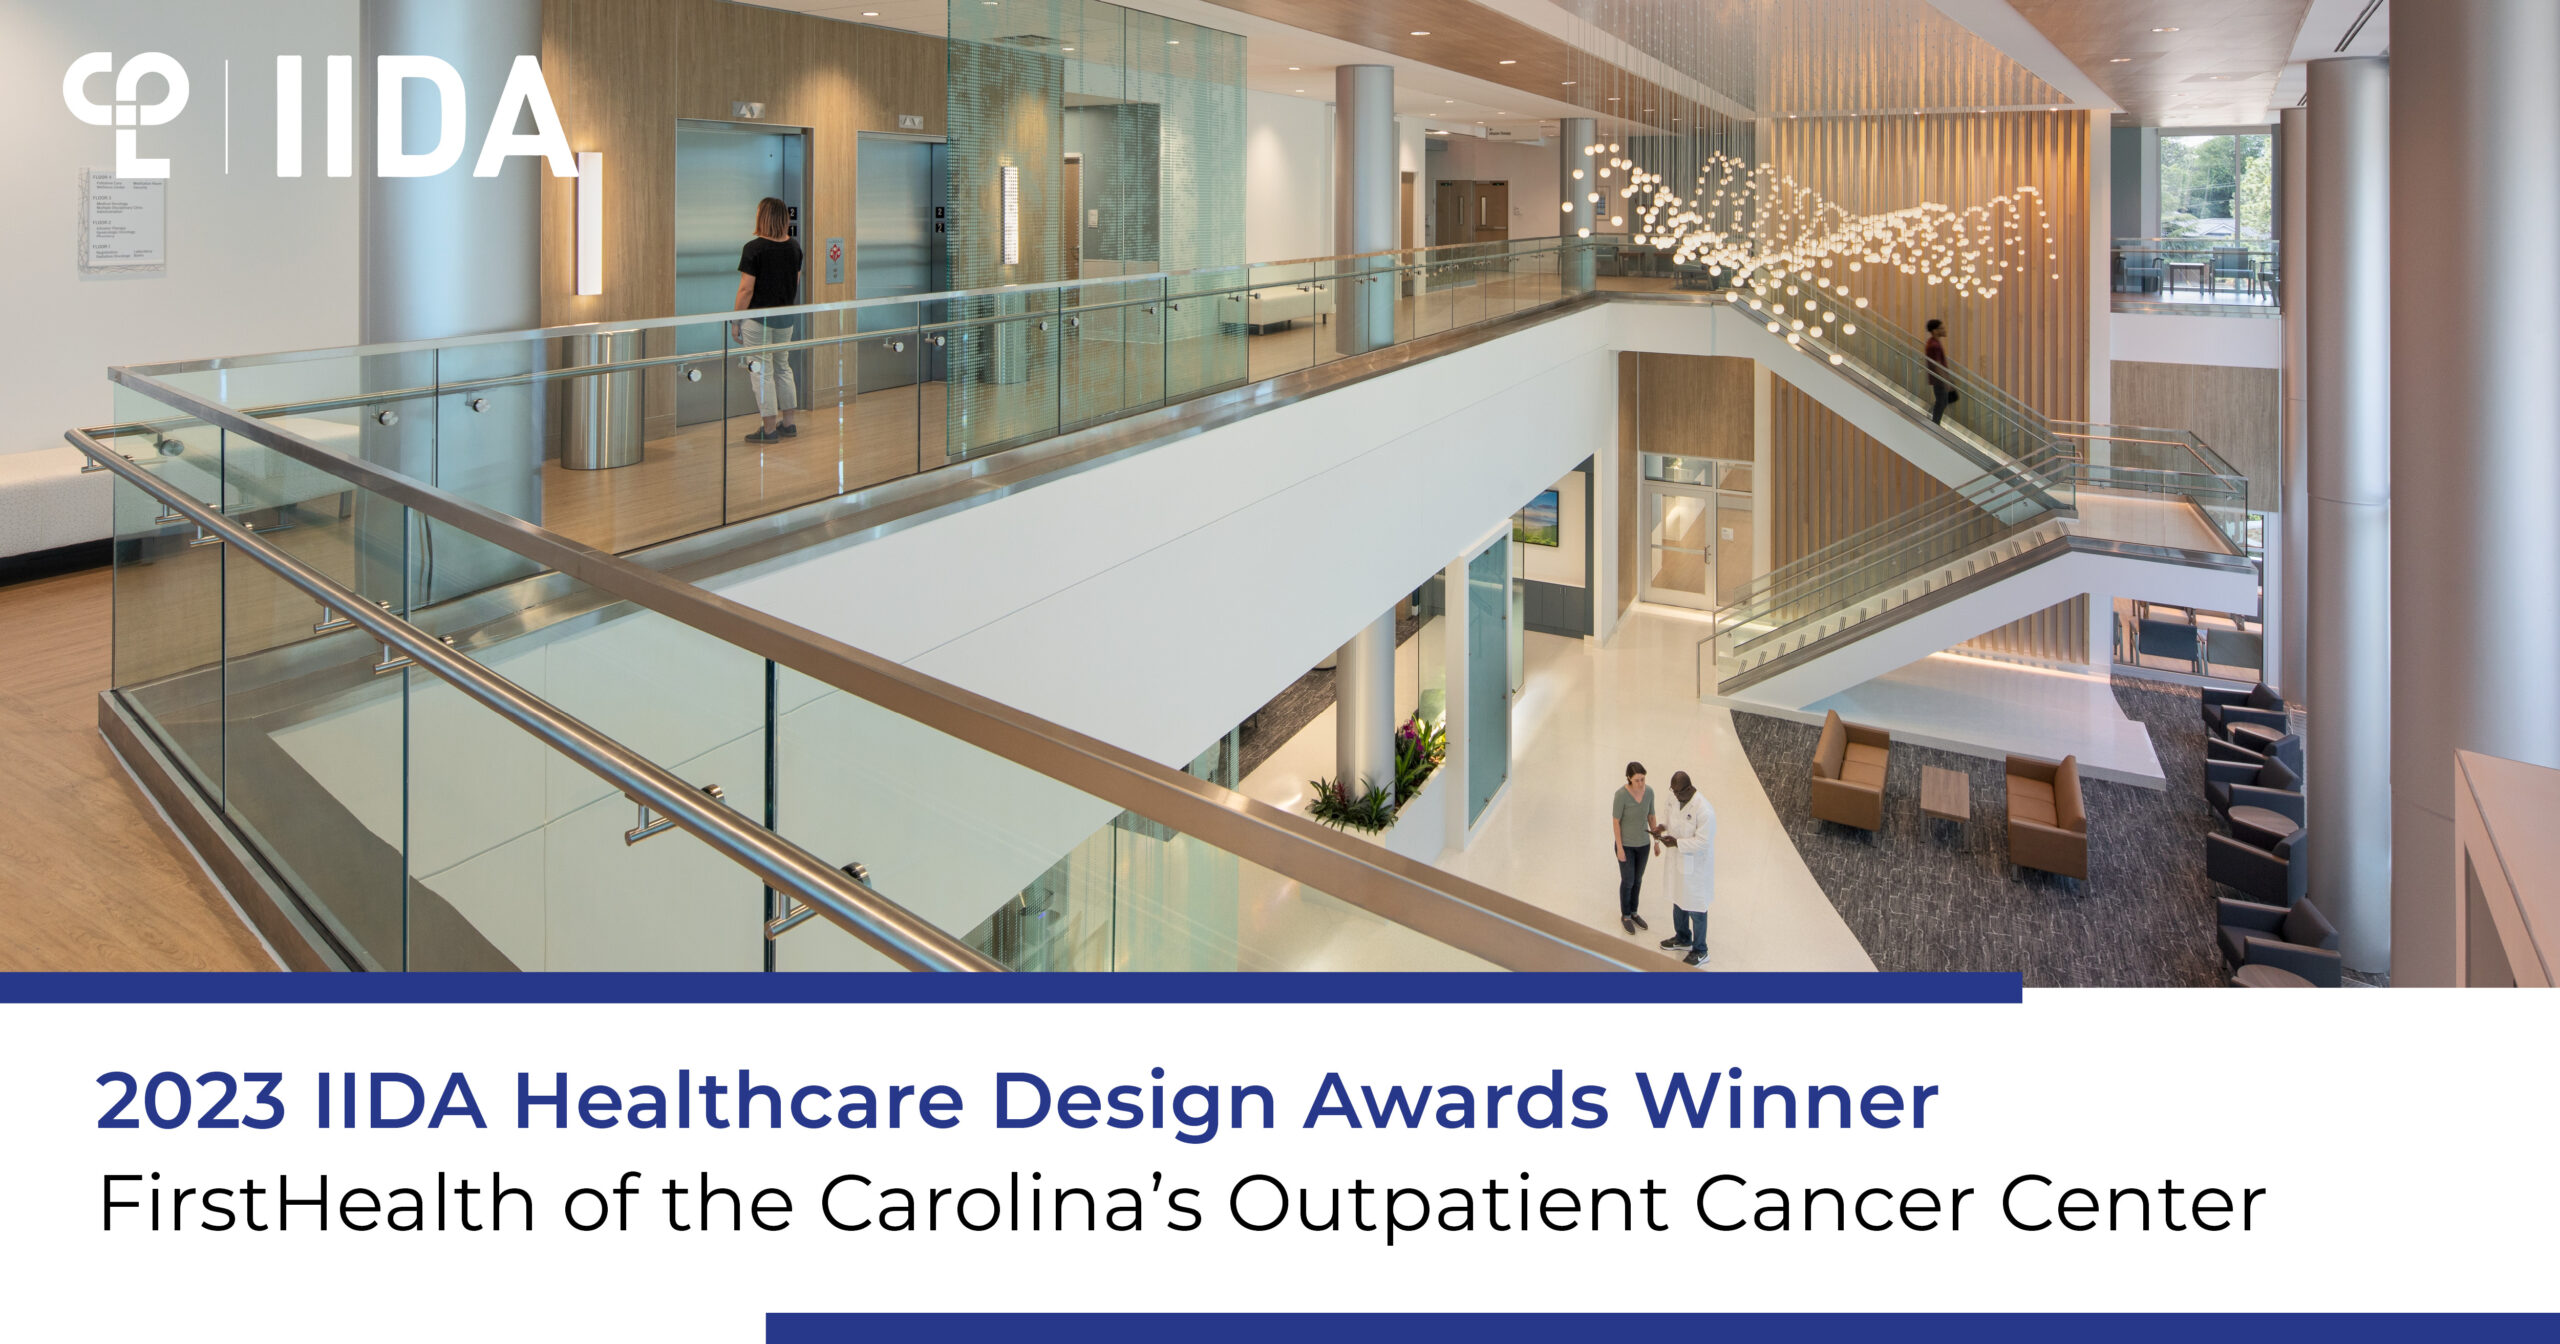 Image is a graphic that shows a hospital lobby from the second floor looking down onto the first floor. Stairs can be seen in the distance. There's a modern light fixture. In the left corner is the CPL logo and the IIDA logo. At the bottom it reads "2023 IIDA Healthcare Design Awards Winner FirstHealth of the Carolina's Outpatient Cancer Center"